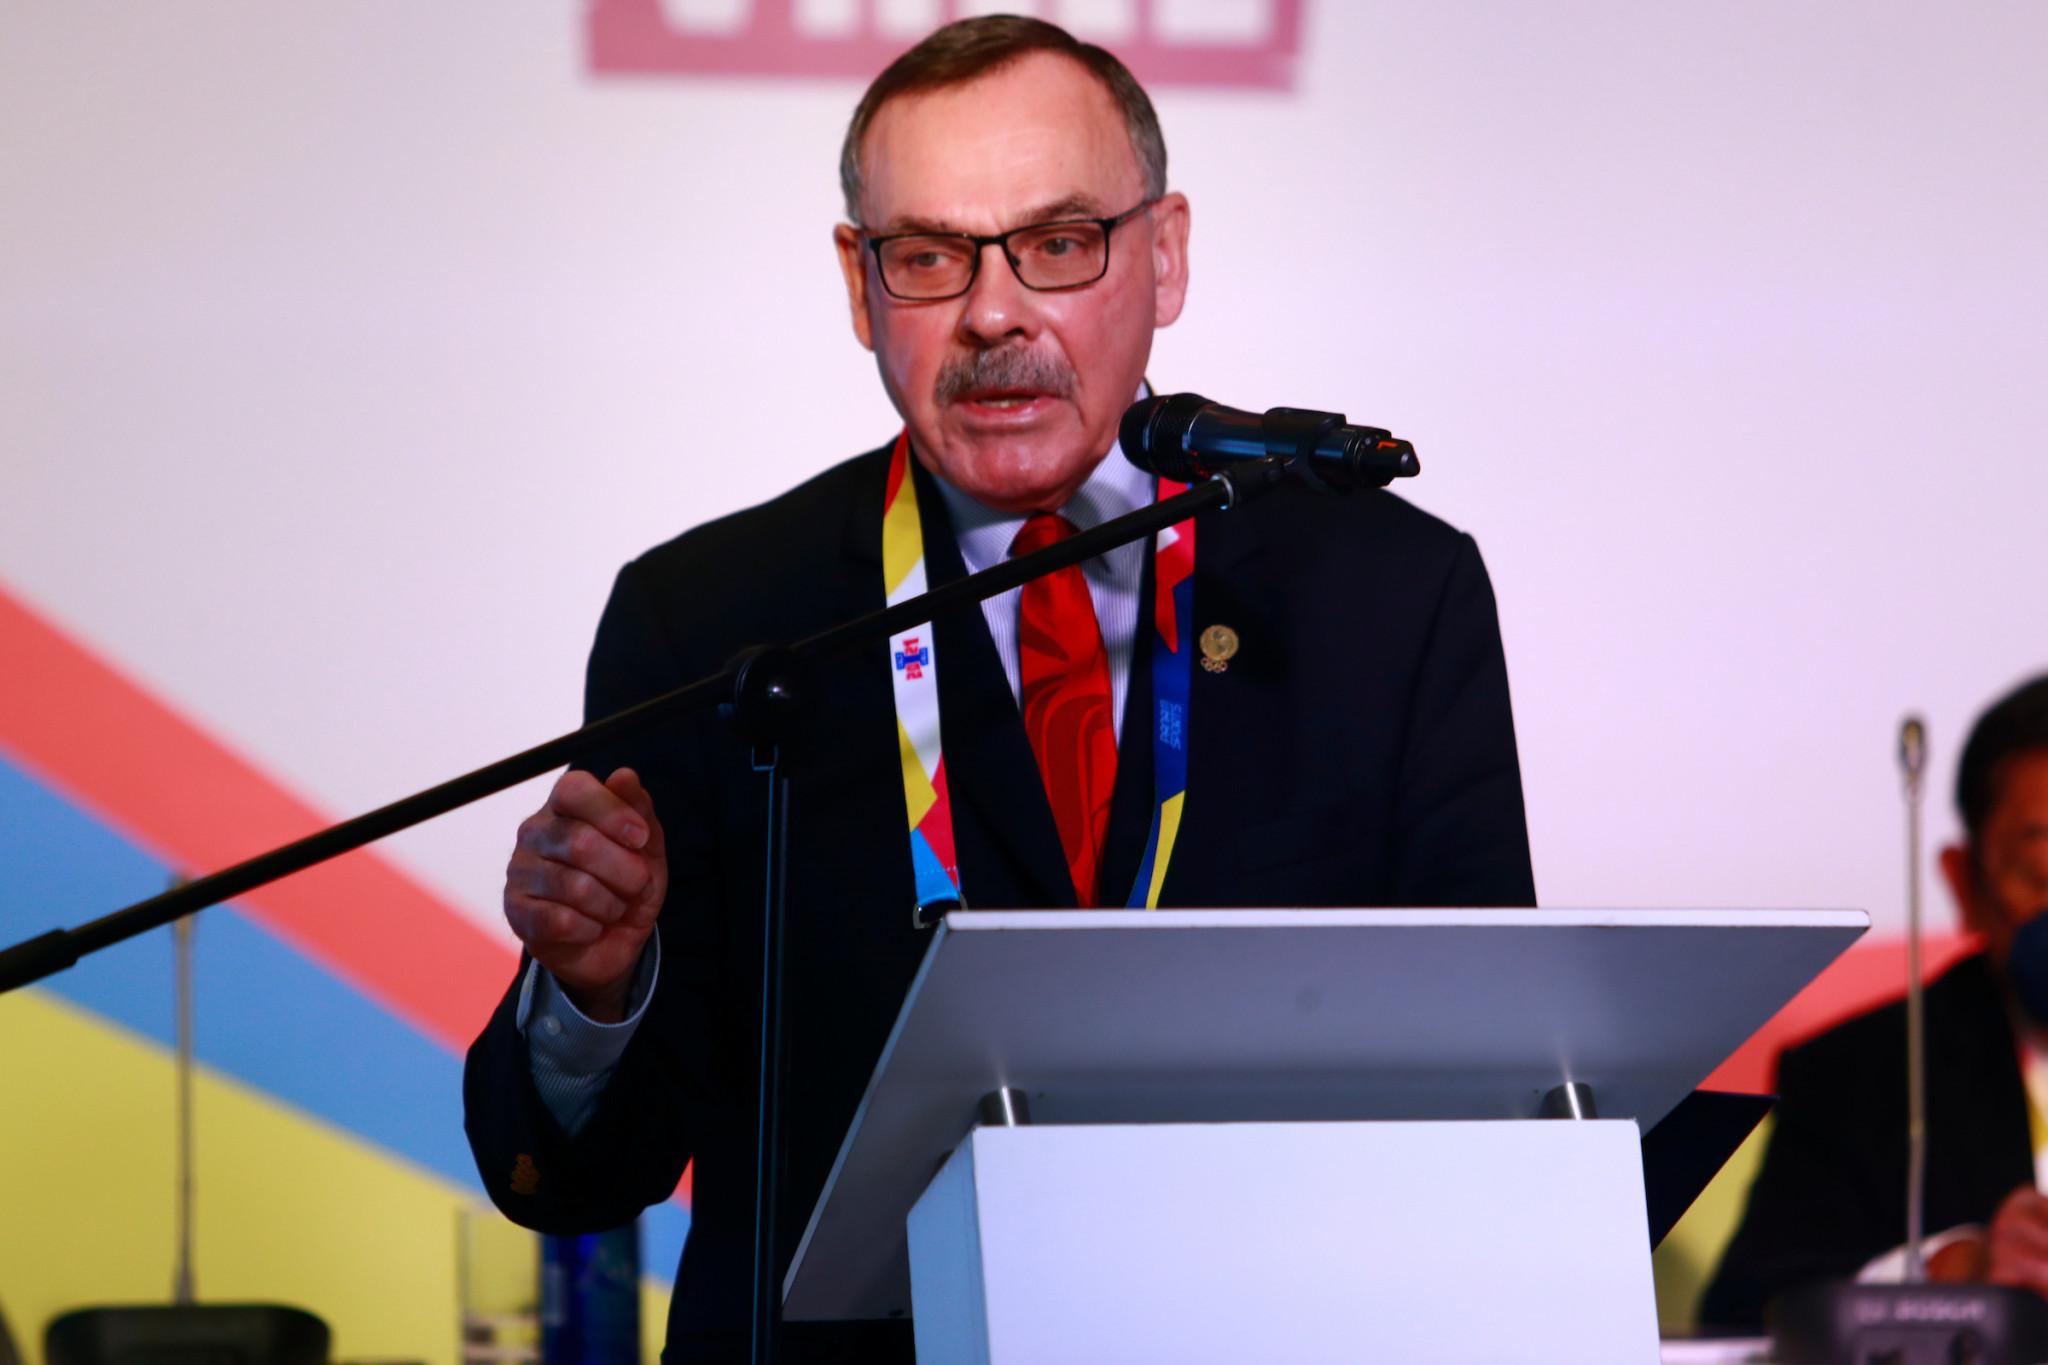 Legal Commission President Michael Chambers urged National Olympic Committee leaders to ensure their athletes are well-educated on anti-doping measures before the Junior Pan American Games in Cali begin @Agencia.XpressMedia 